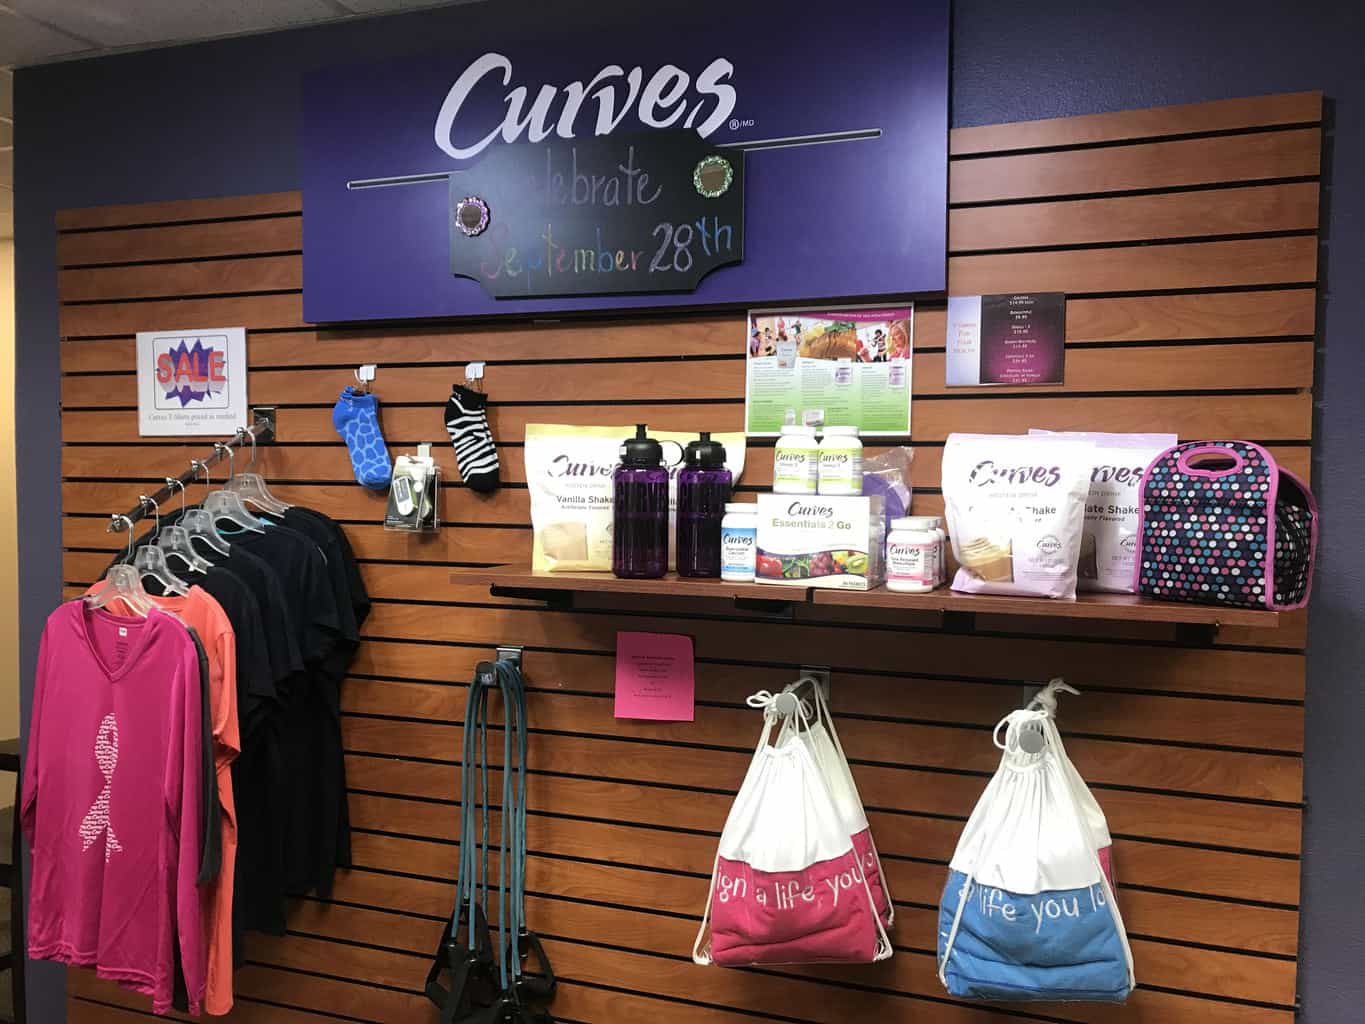 Are you looking for a new exercise routine? Curves offers a fun 30-minute circuit training workout for women only that works every major muscle group with strength training, cardio and stretching.